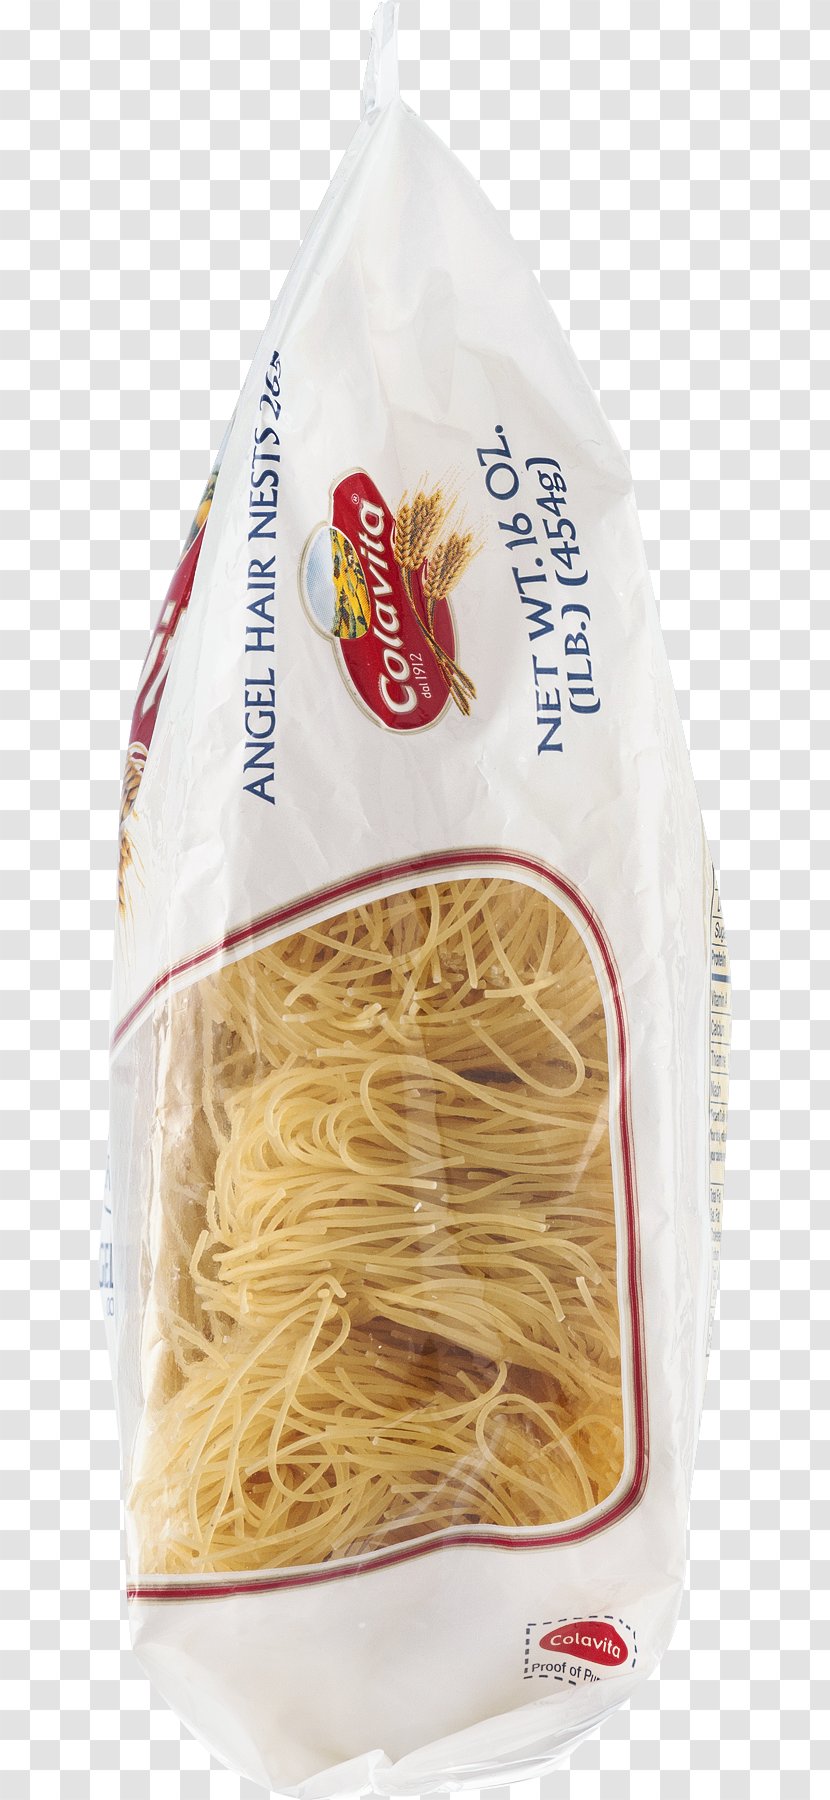 Chinese Noodles Capellini Vermicelli Pasta Capelli D'angelo - Asian Food - Commodity Transparent PNG